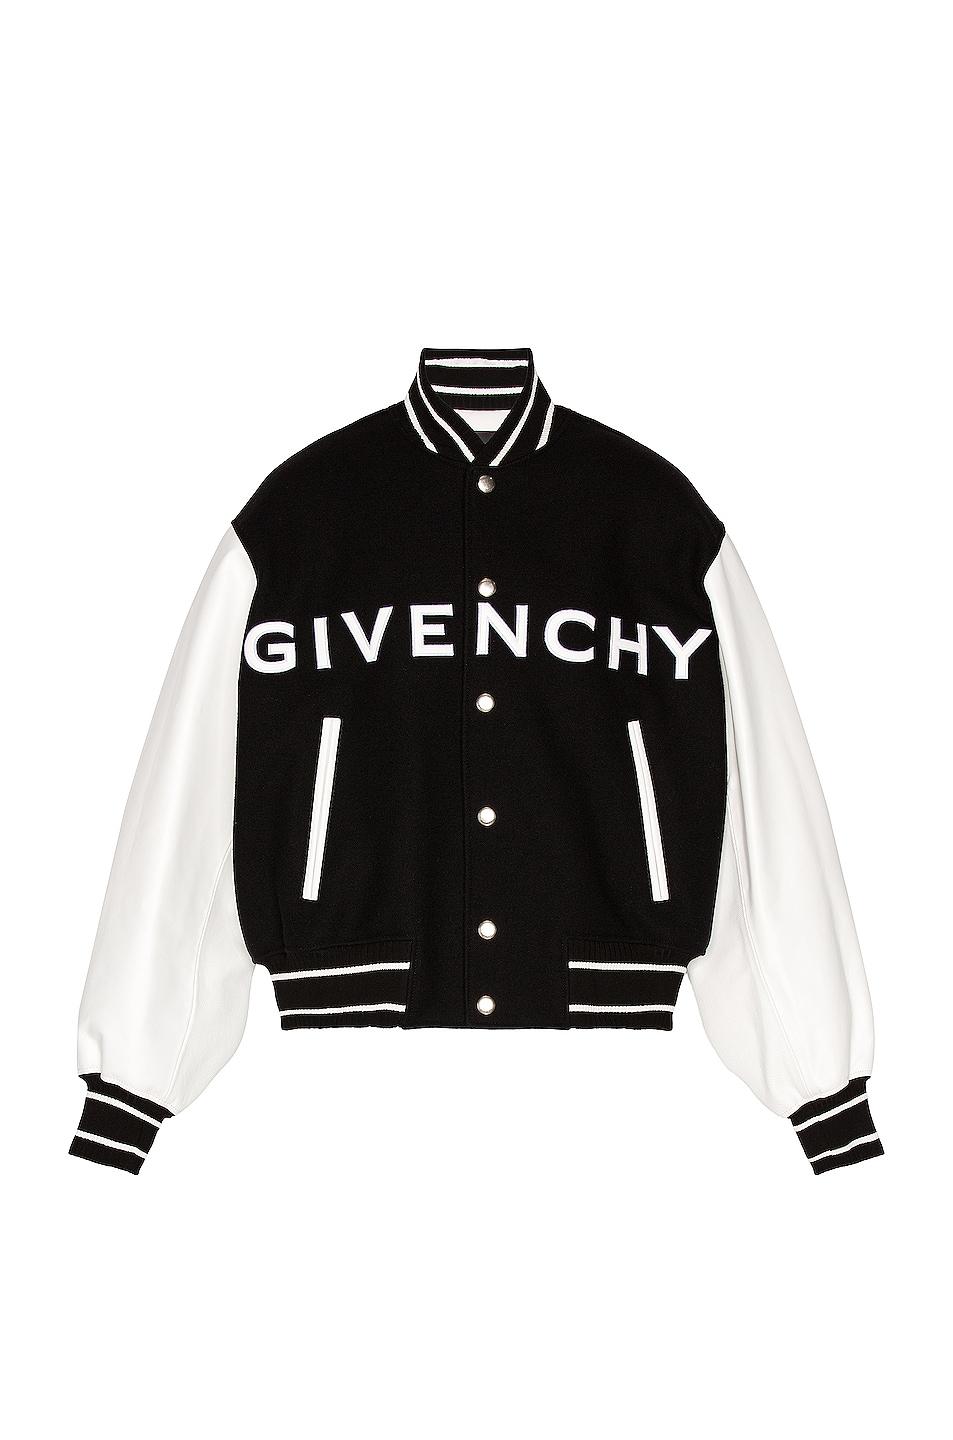 Total 92+ imagen givenchy wool - Abzlocal.mx